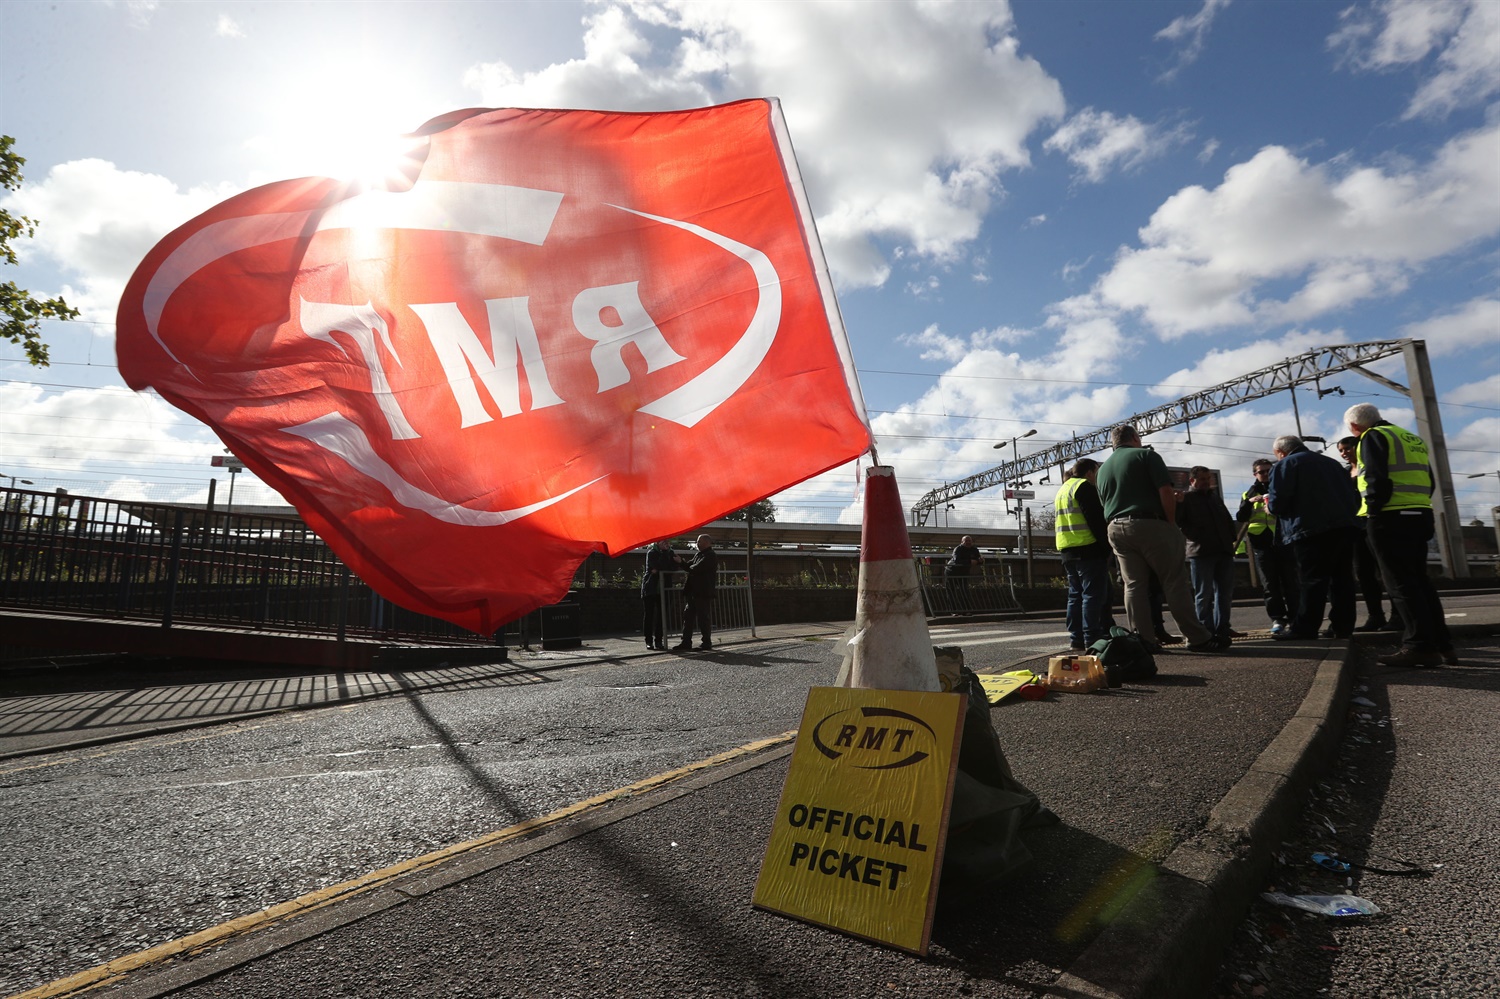 RMT announces further 24-hour strike on Northern and Merseyrail